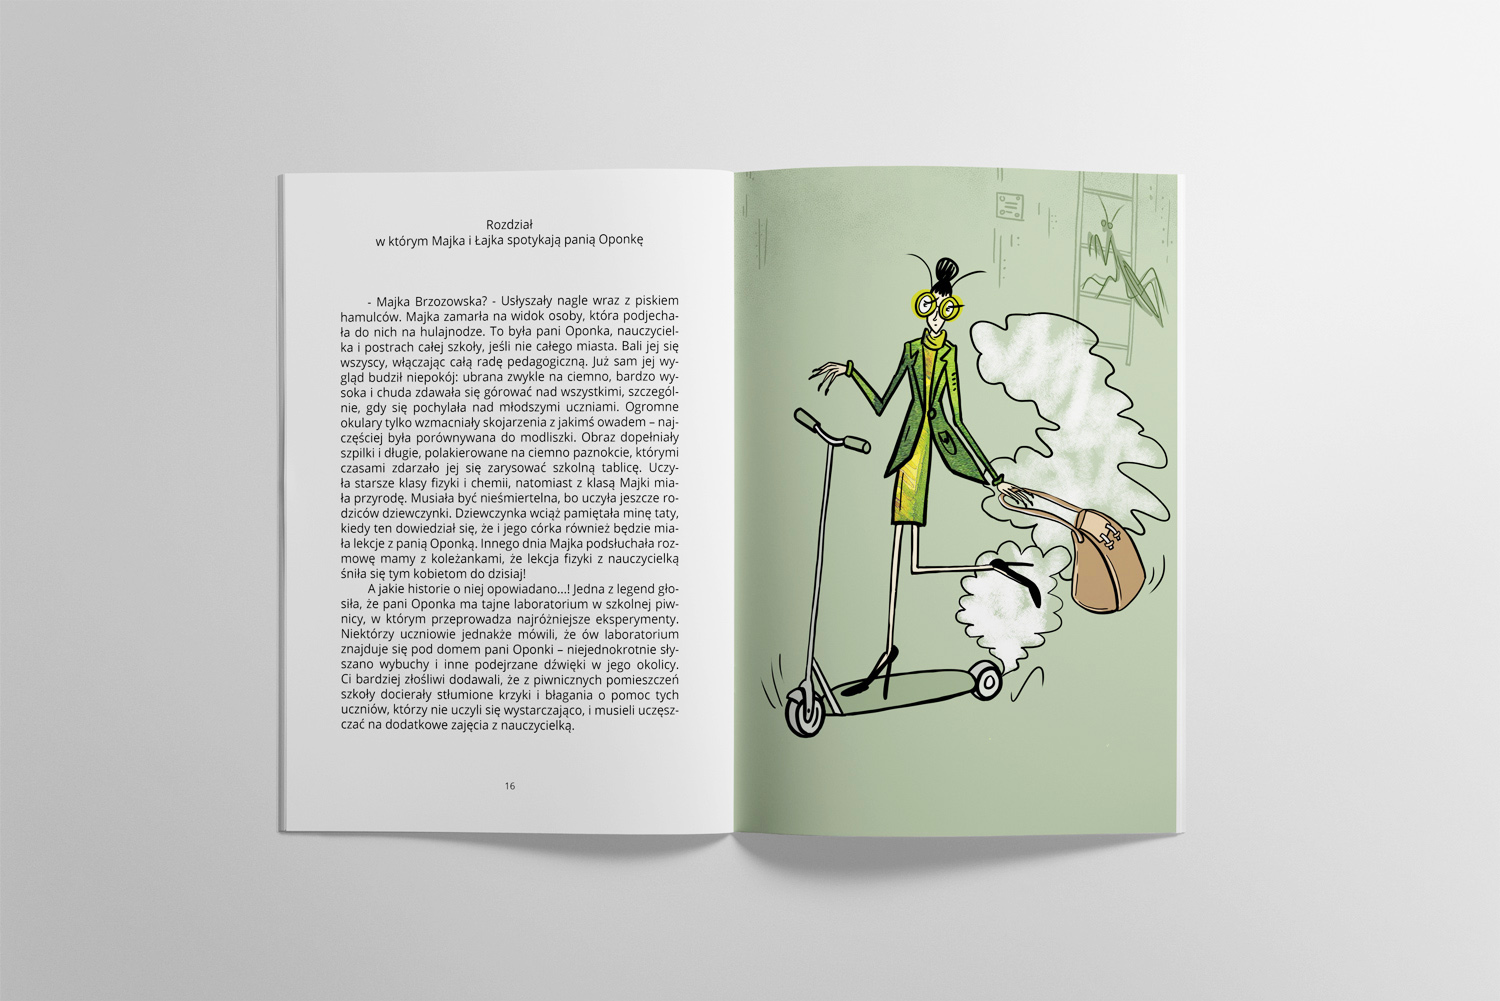 Children book illustration - Fantastic adventures of Majka and Laika. Movement and emotional drawing. Comics styles. The book aims to inspire young girls to pursue their dreams and develop their scientific skills.